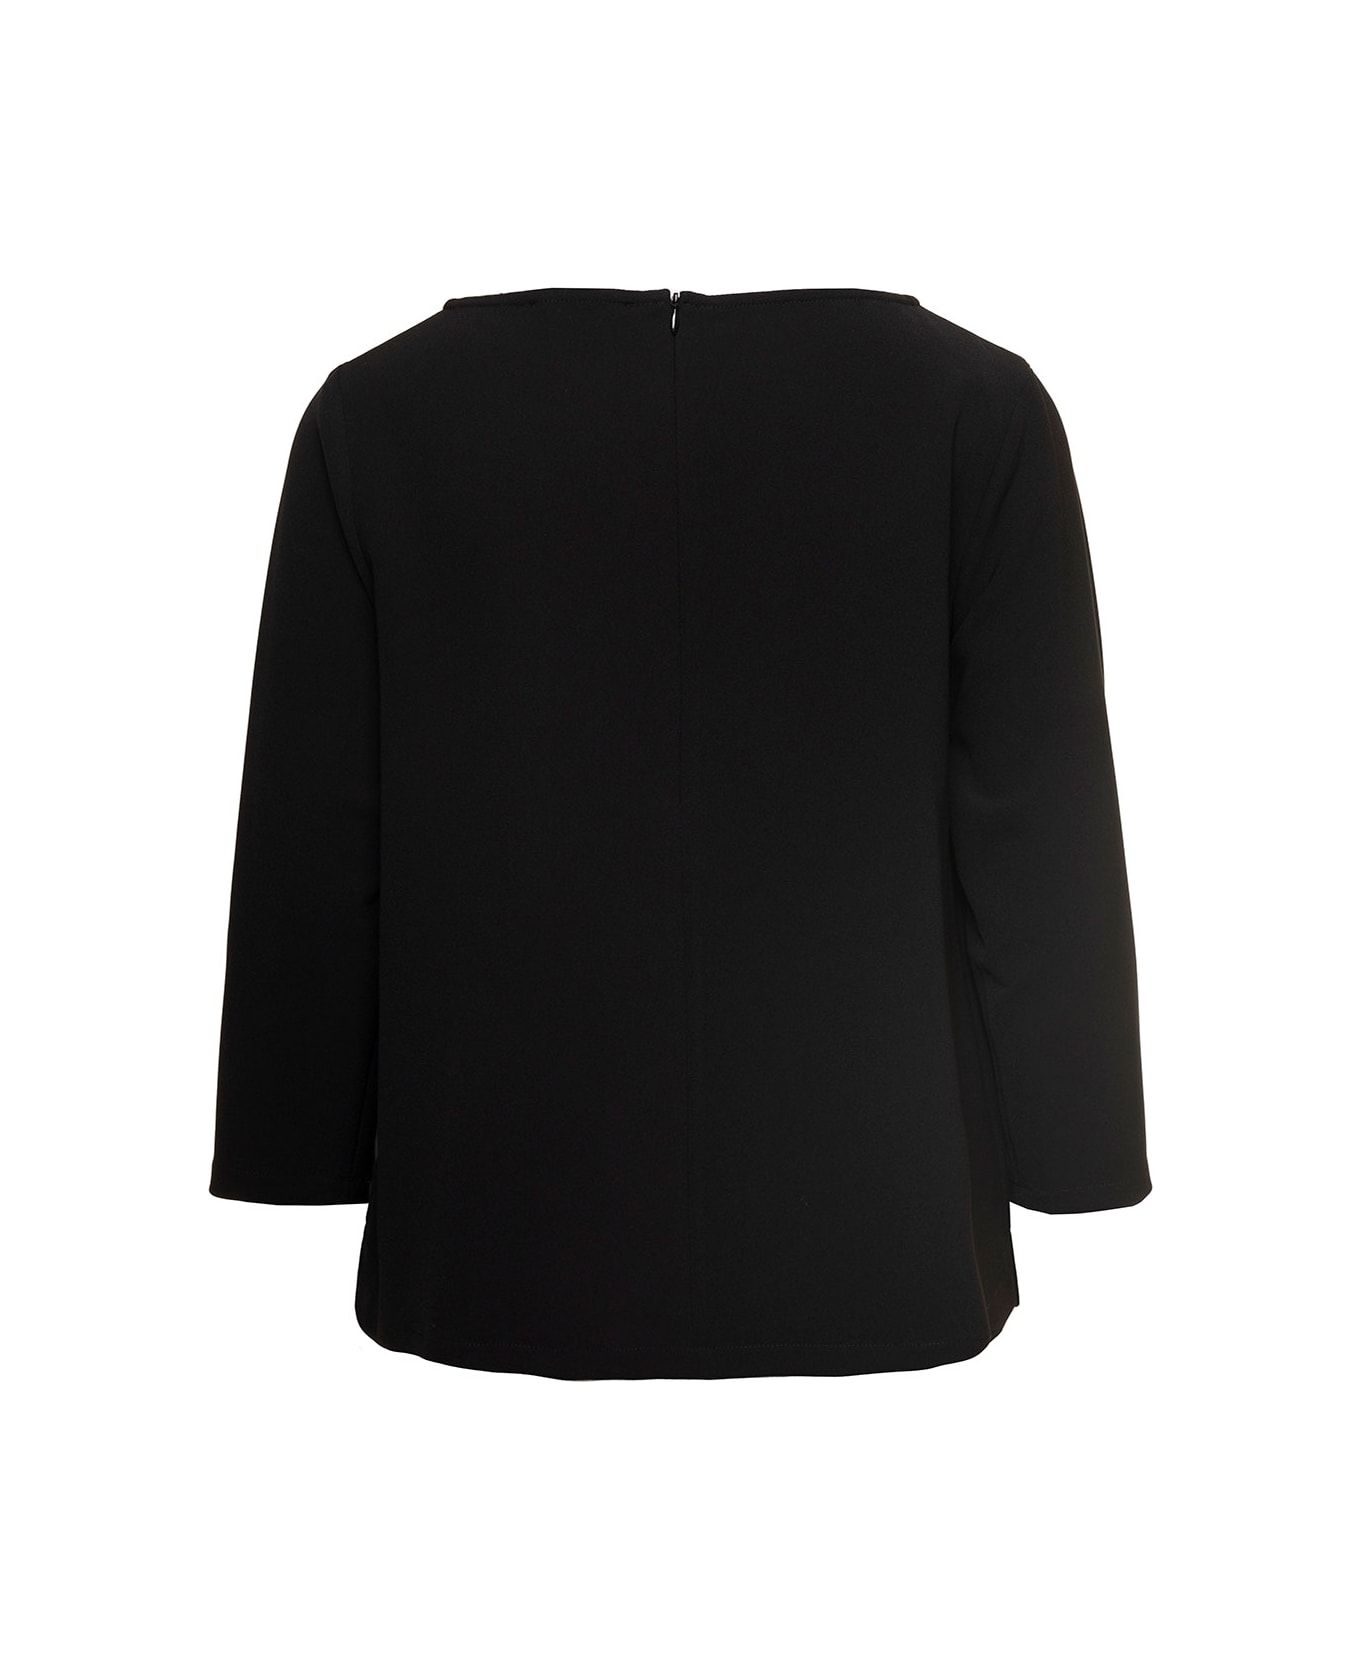 Antonelli Black Long Sleeved Blouse With Zip In Stretch Fabric Woman - Black